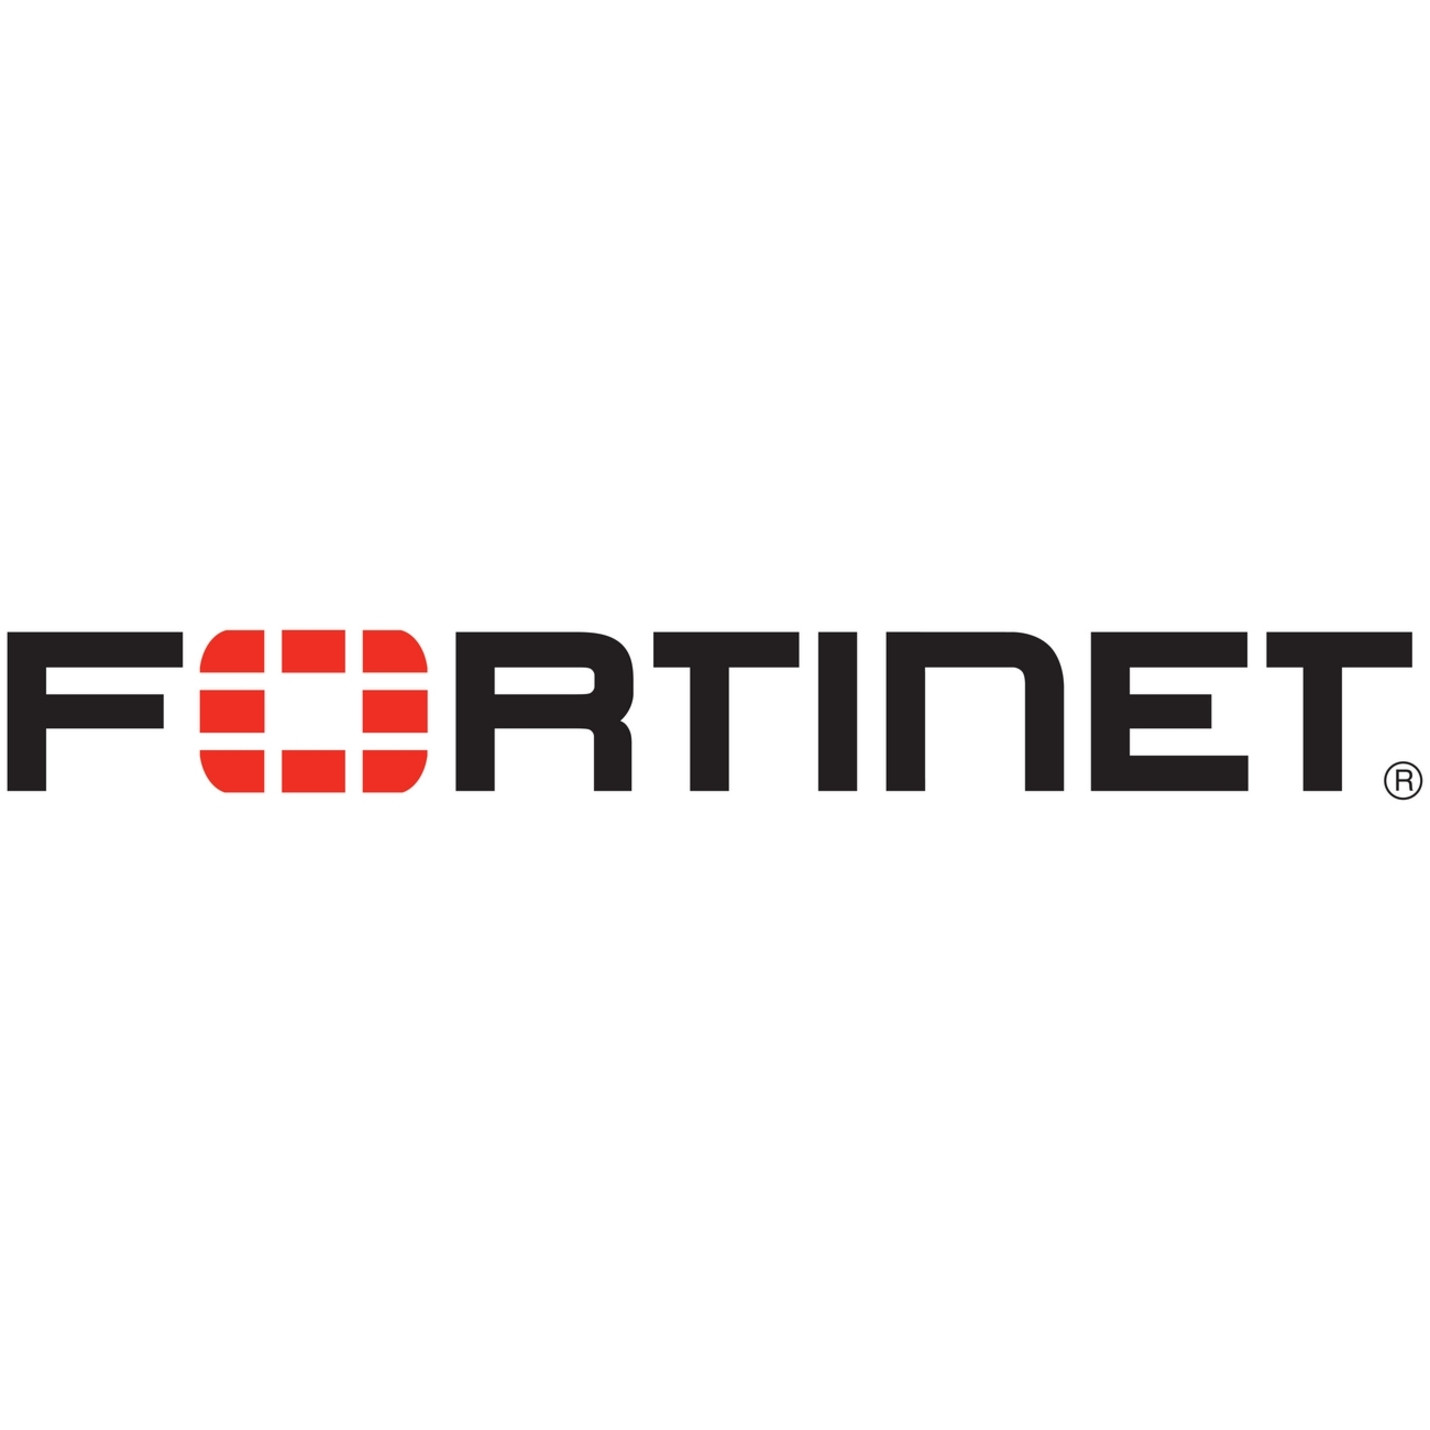 Fortinet Mounting Rail for Network Security & Firewall Device SP-FG1240B-RAIL